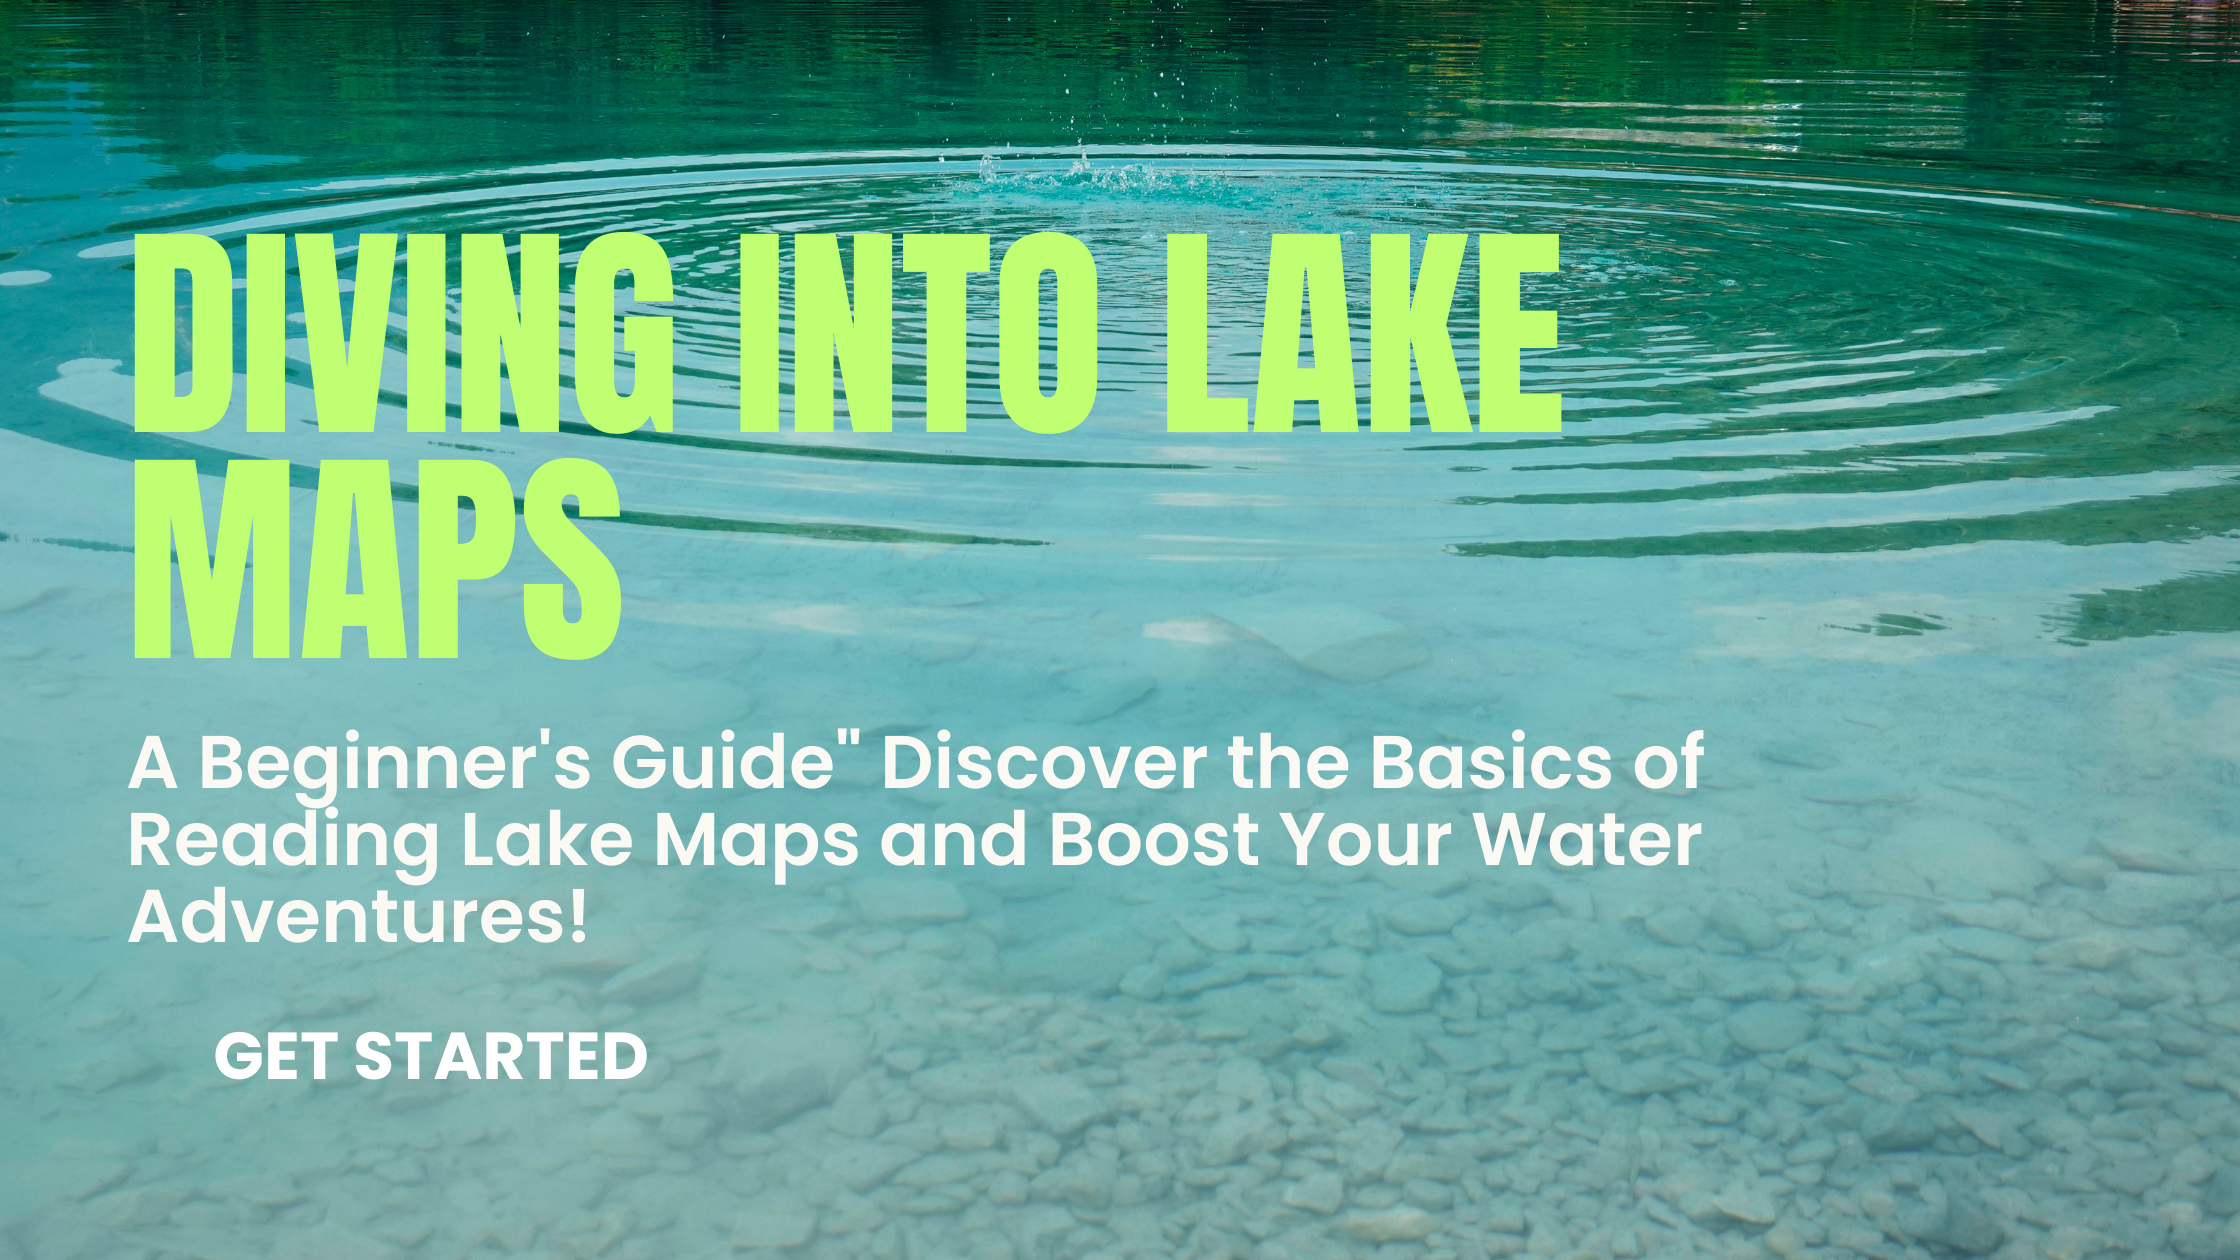 A Beginner’s Guide to Reading Lake Maps